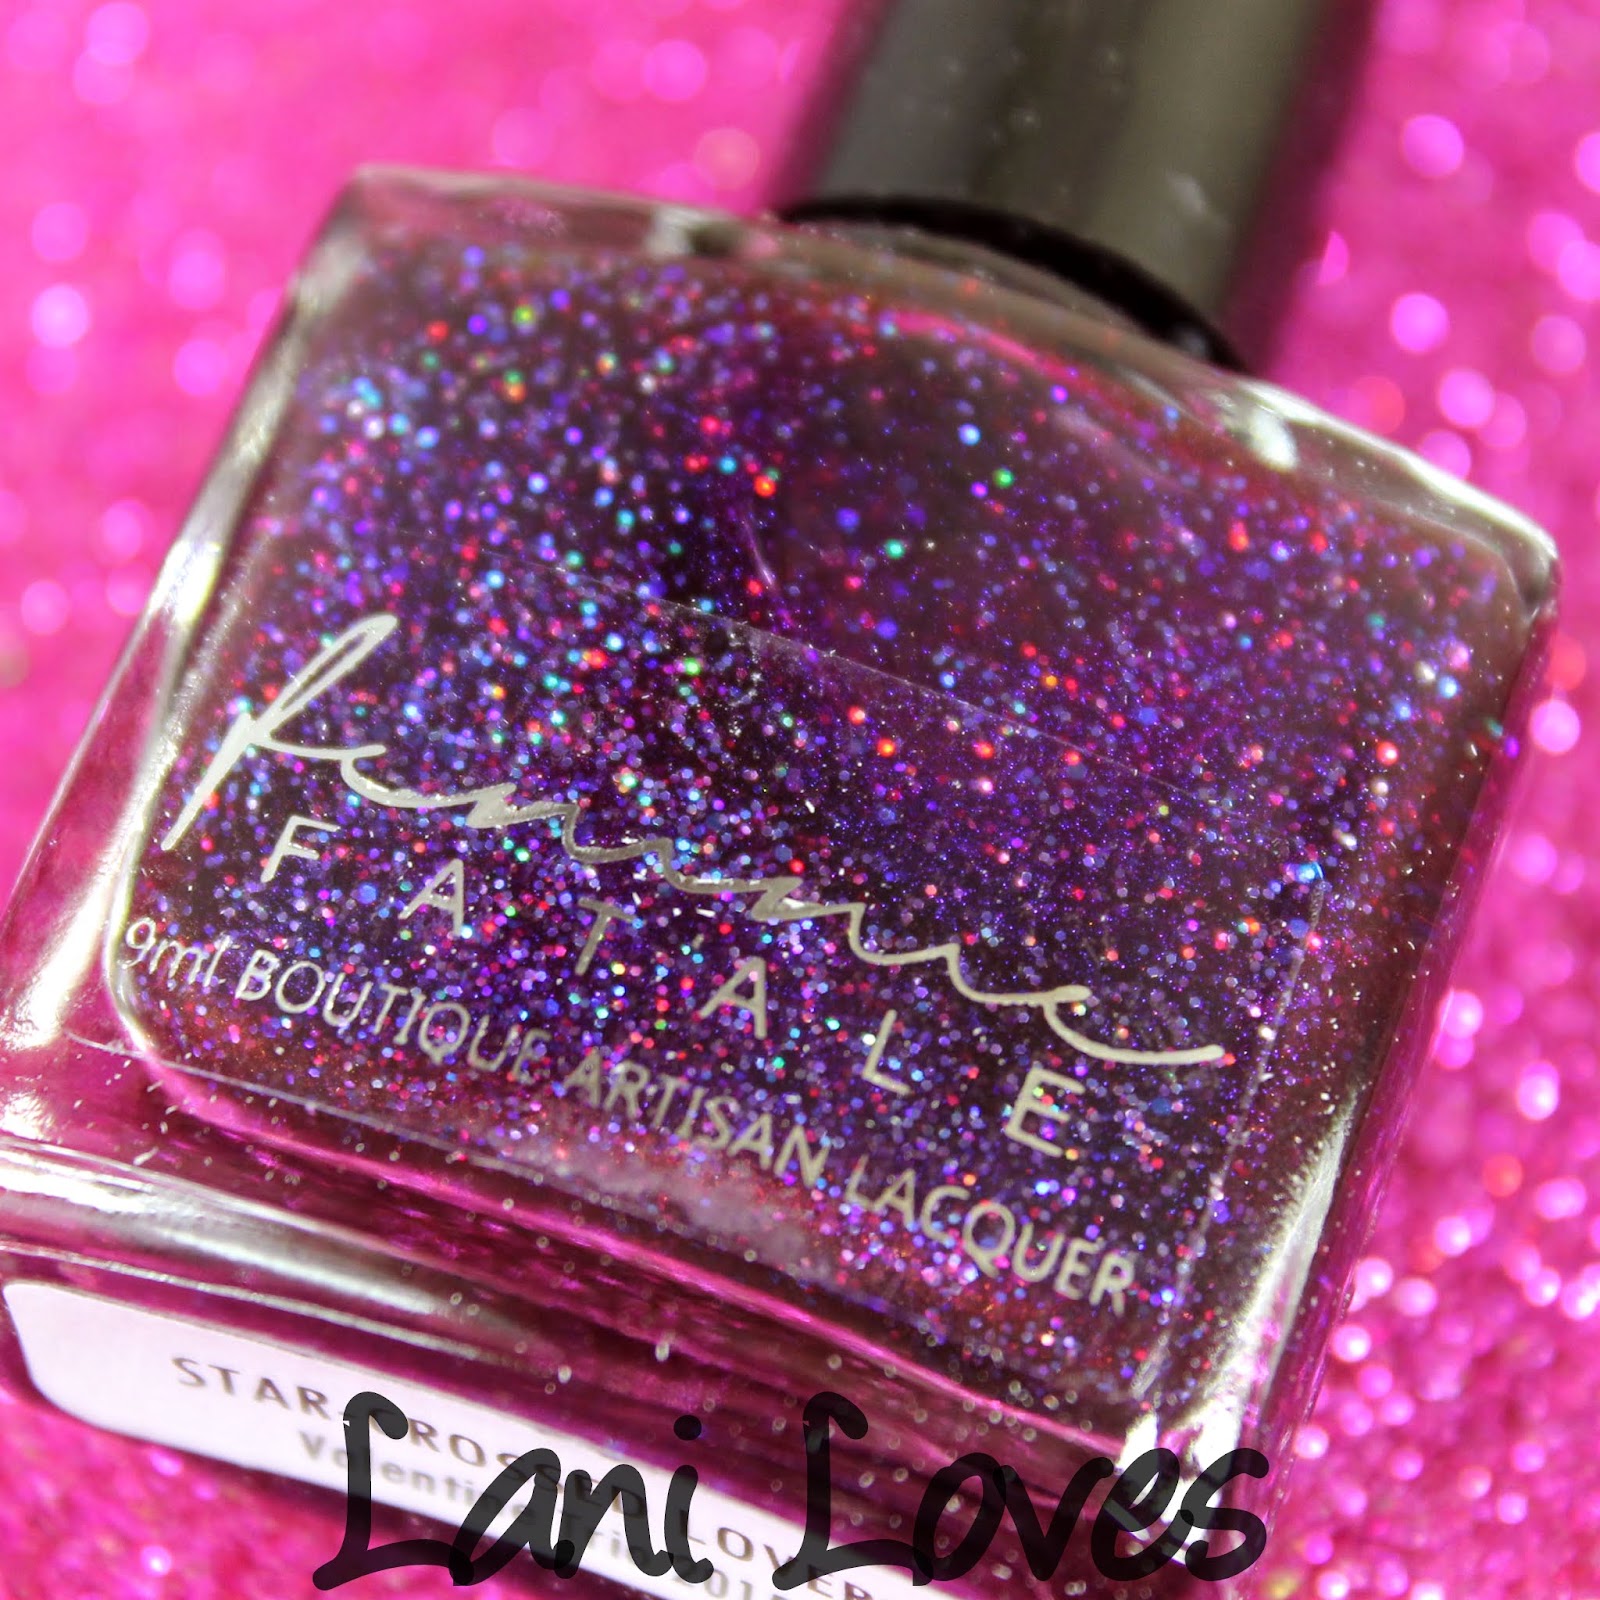 Femme Fatale Cosmetics - Star-Crossed Lovers nail polish swatch